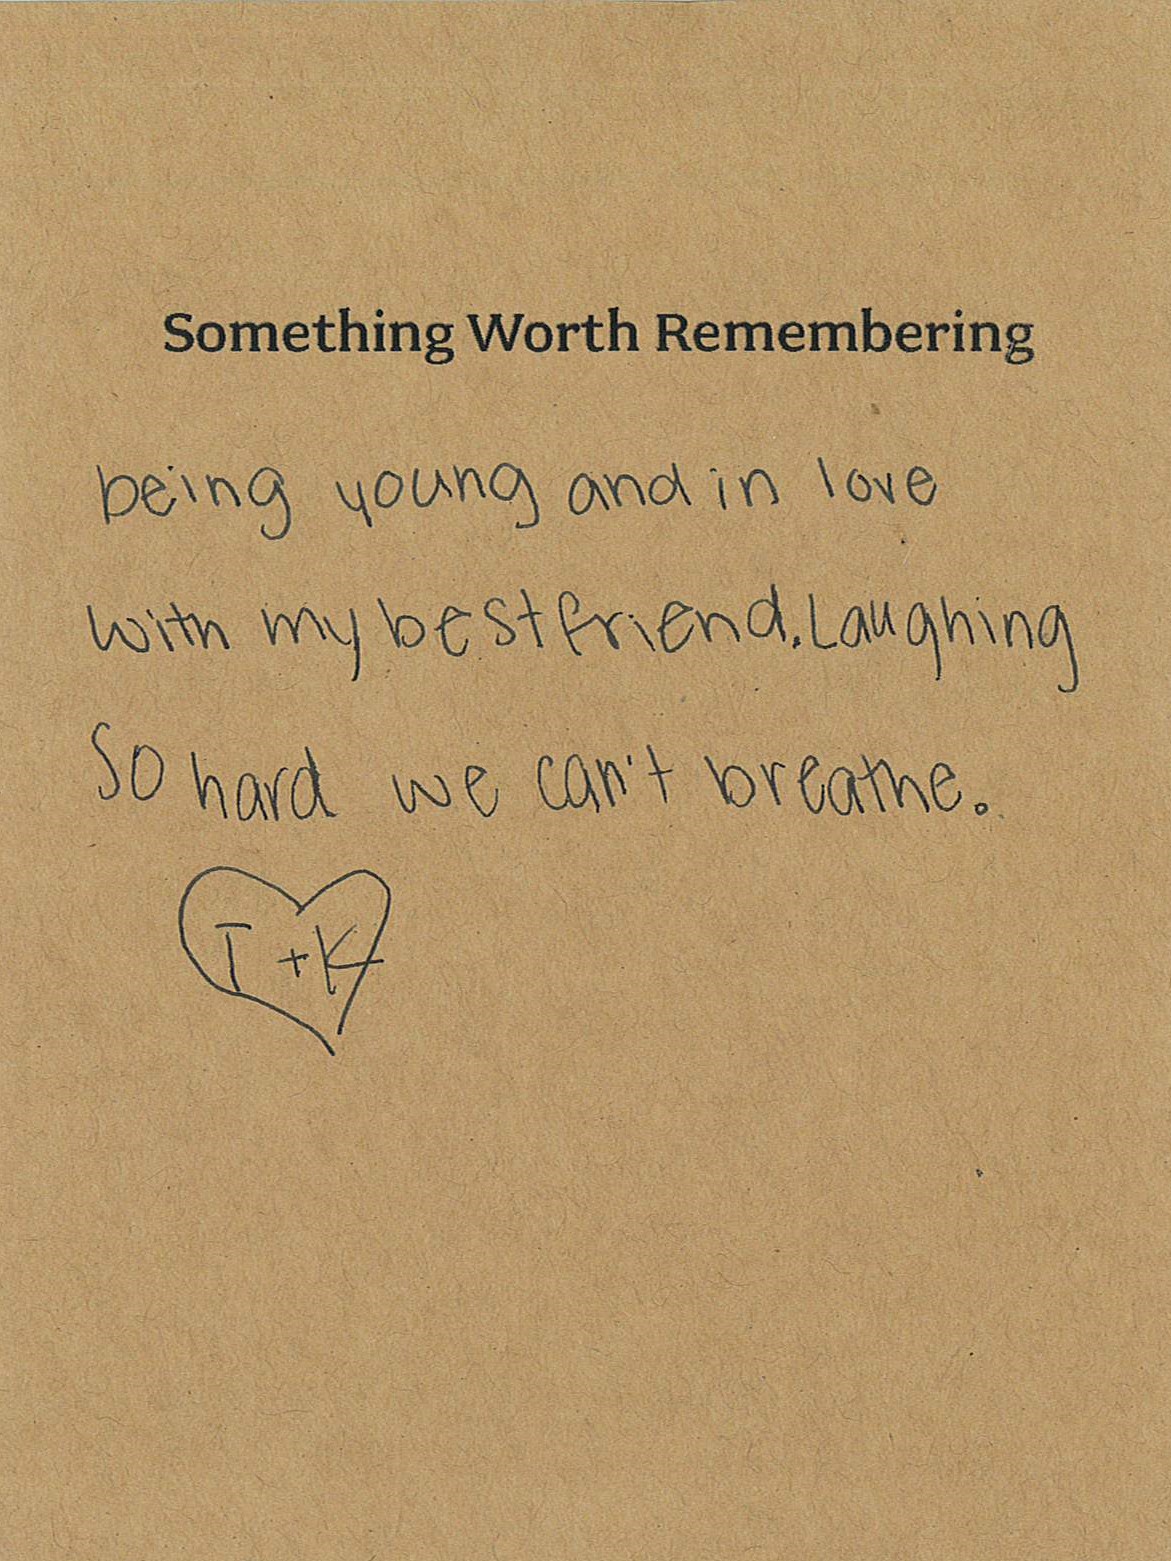 A hand written note reads: "Something Worth Remembering: being young and in love with my best friend. Laughing so hard we can't breathe." The note is signed with a heart contained the initirals "T+K"